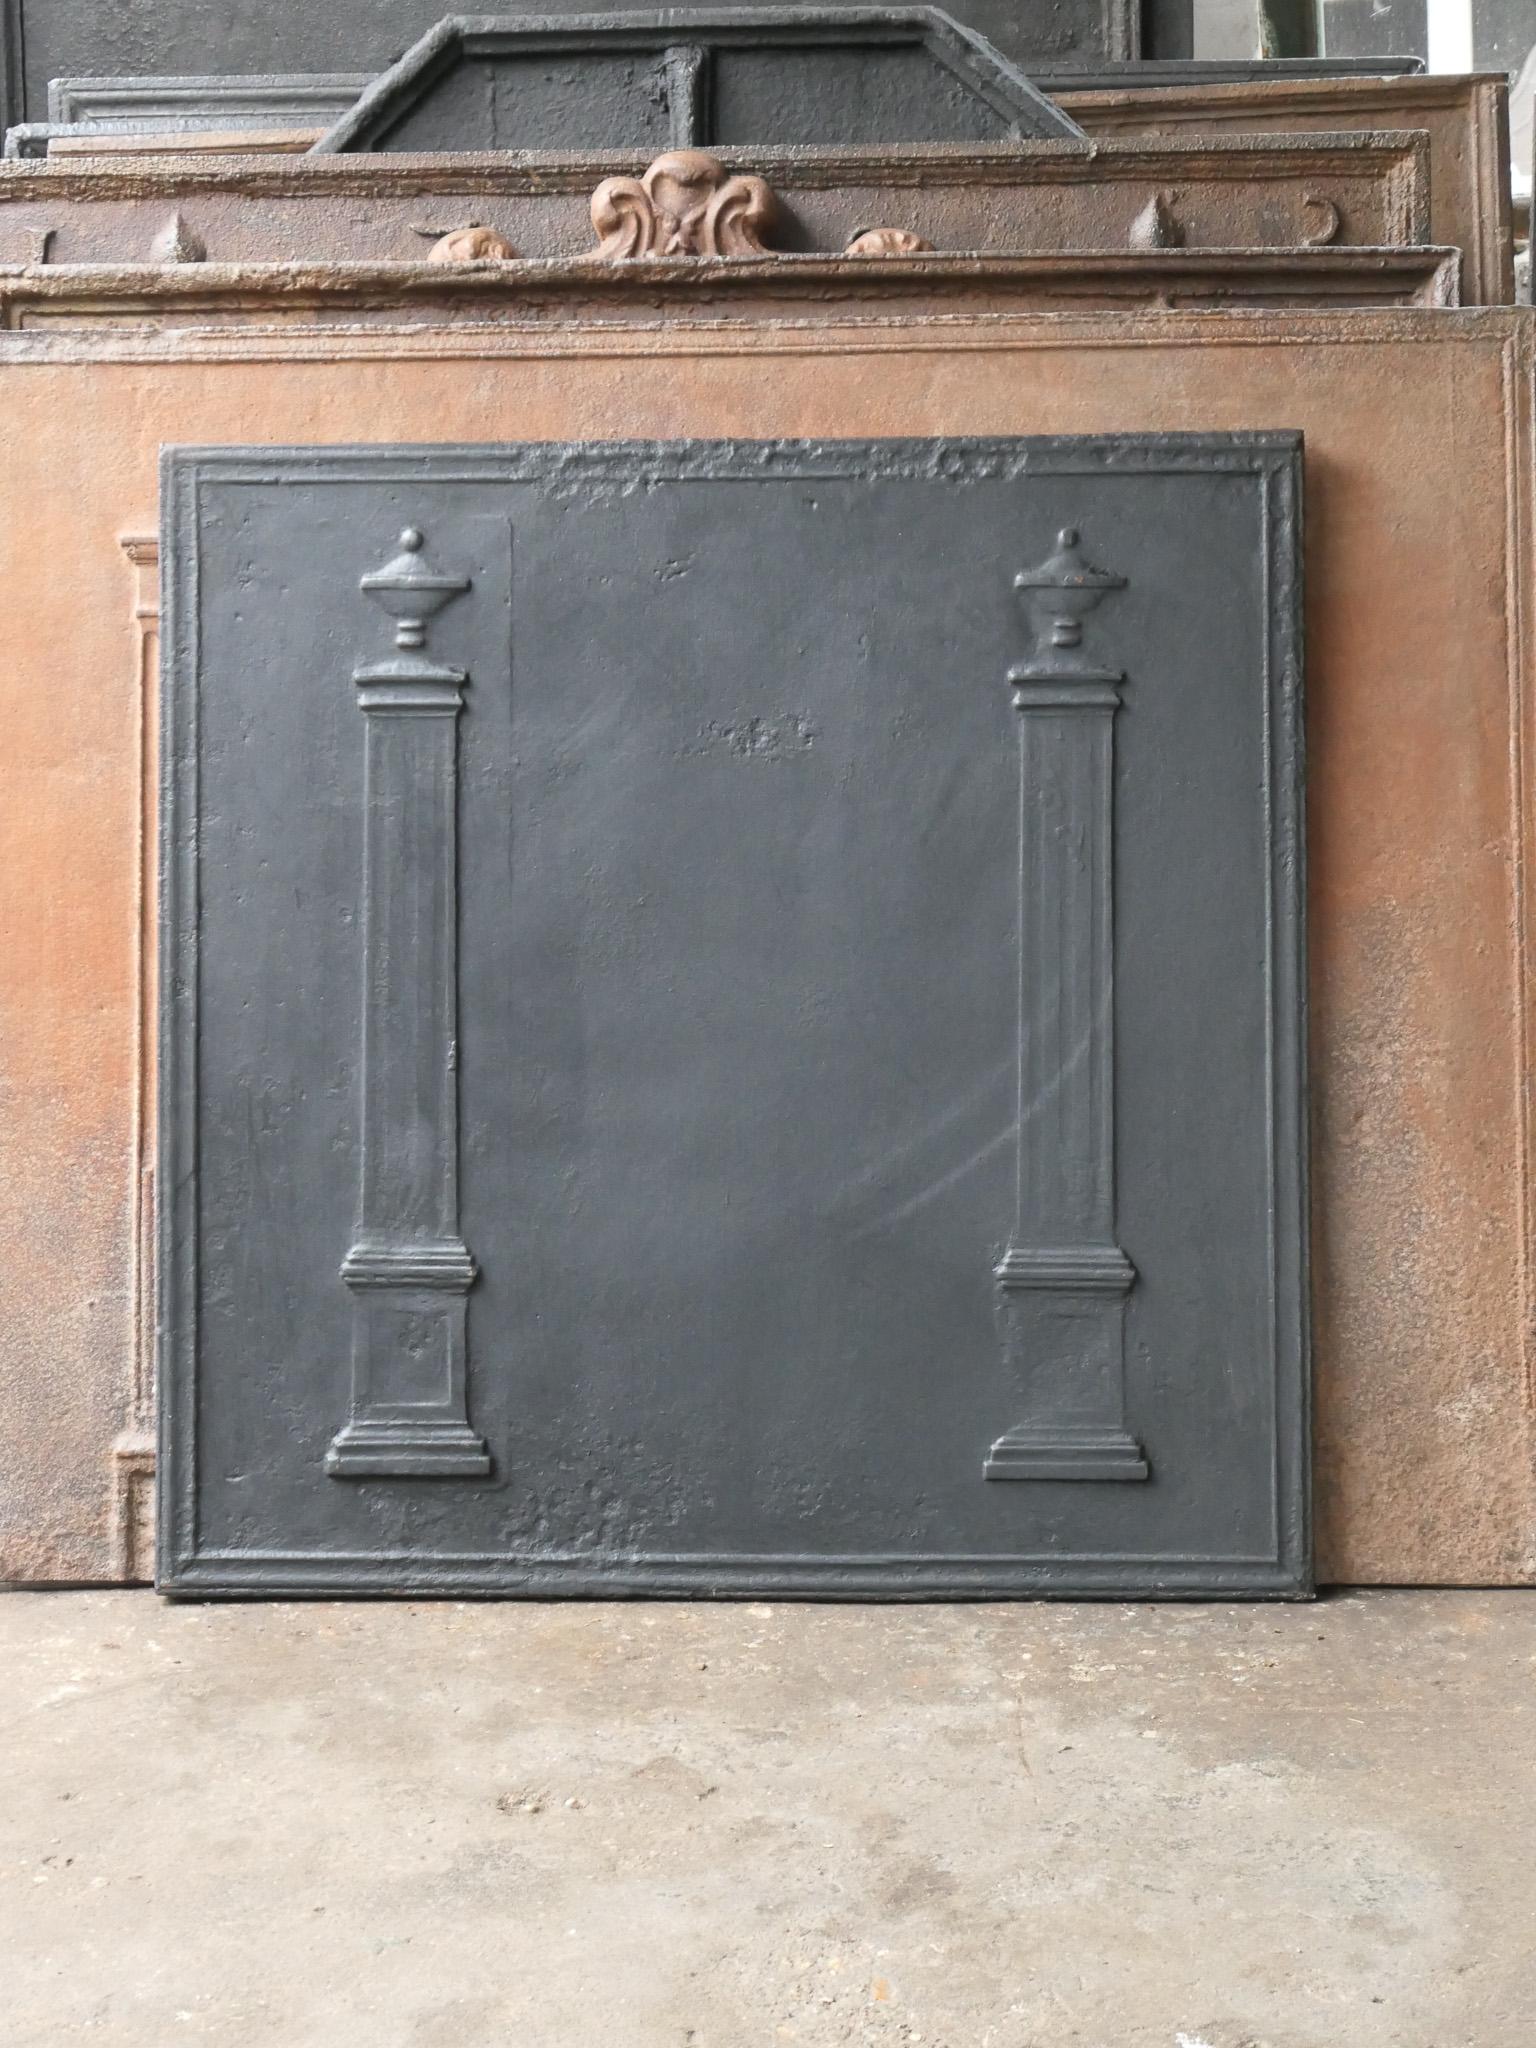 18th - 19th Century French Neoclassical fireback with two pillars of freedom. The pillars symbolize the value liberty, one of the three values of the French revolution. 

The fireback is made of cast iron and has a black / pewter patina. It is in a